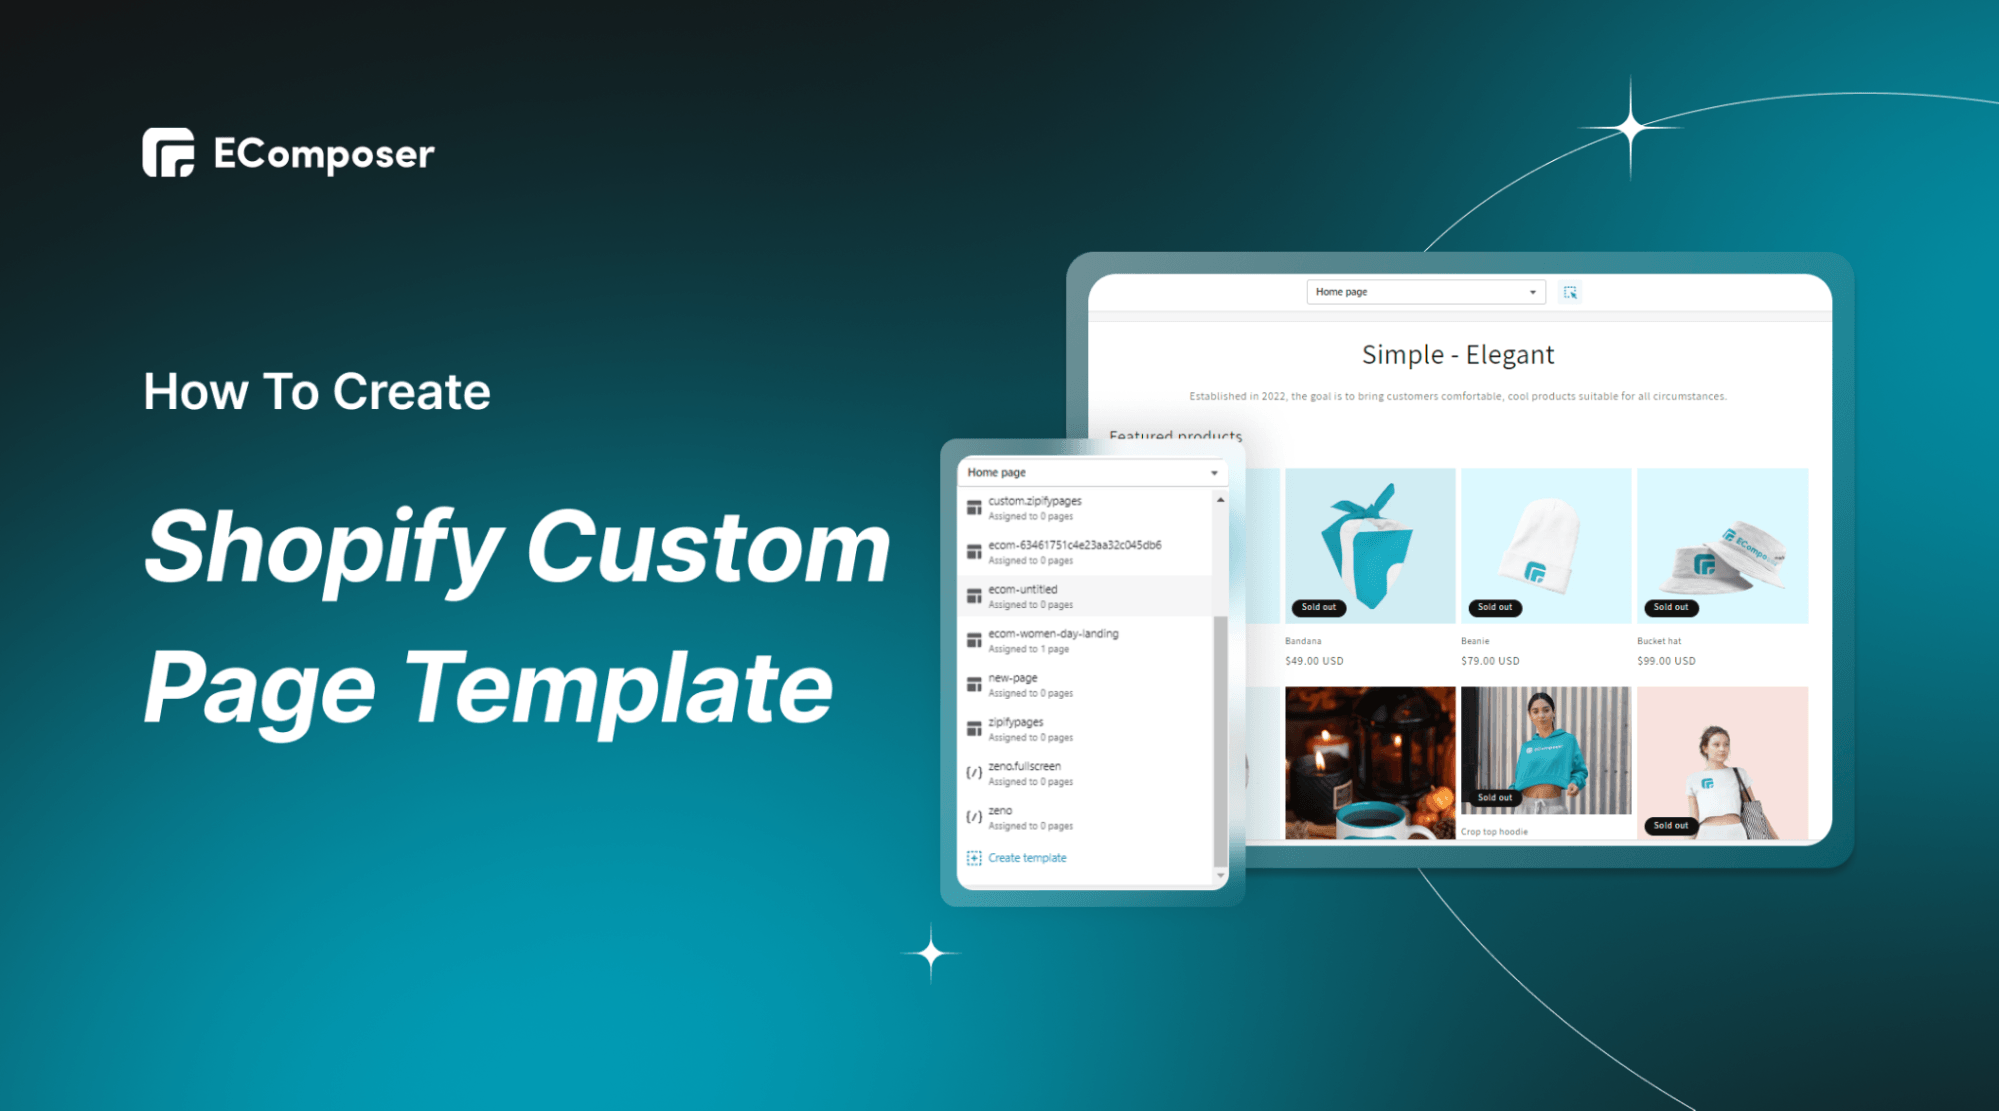 How To Create A Custom Page Template In Shopify – EComposer